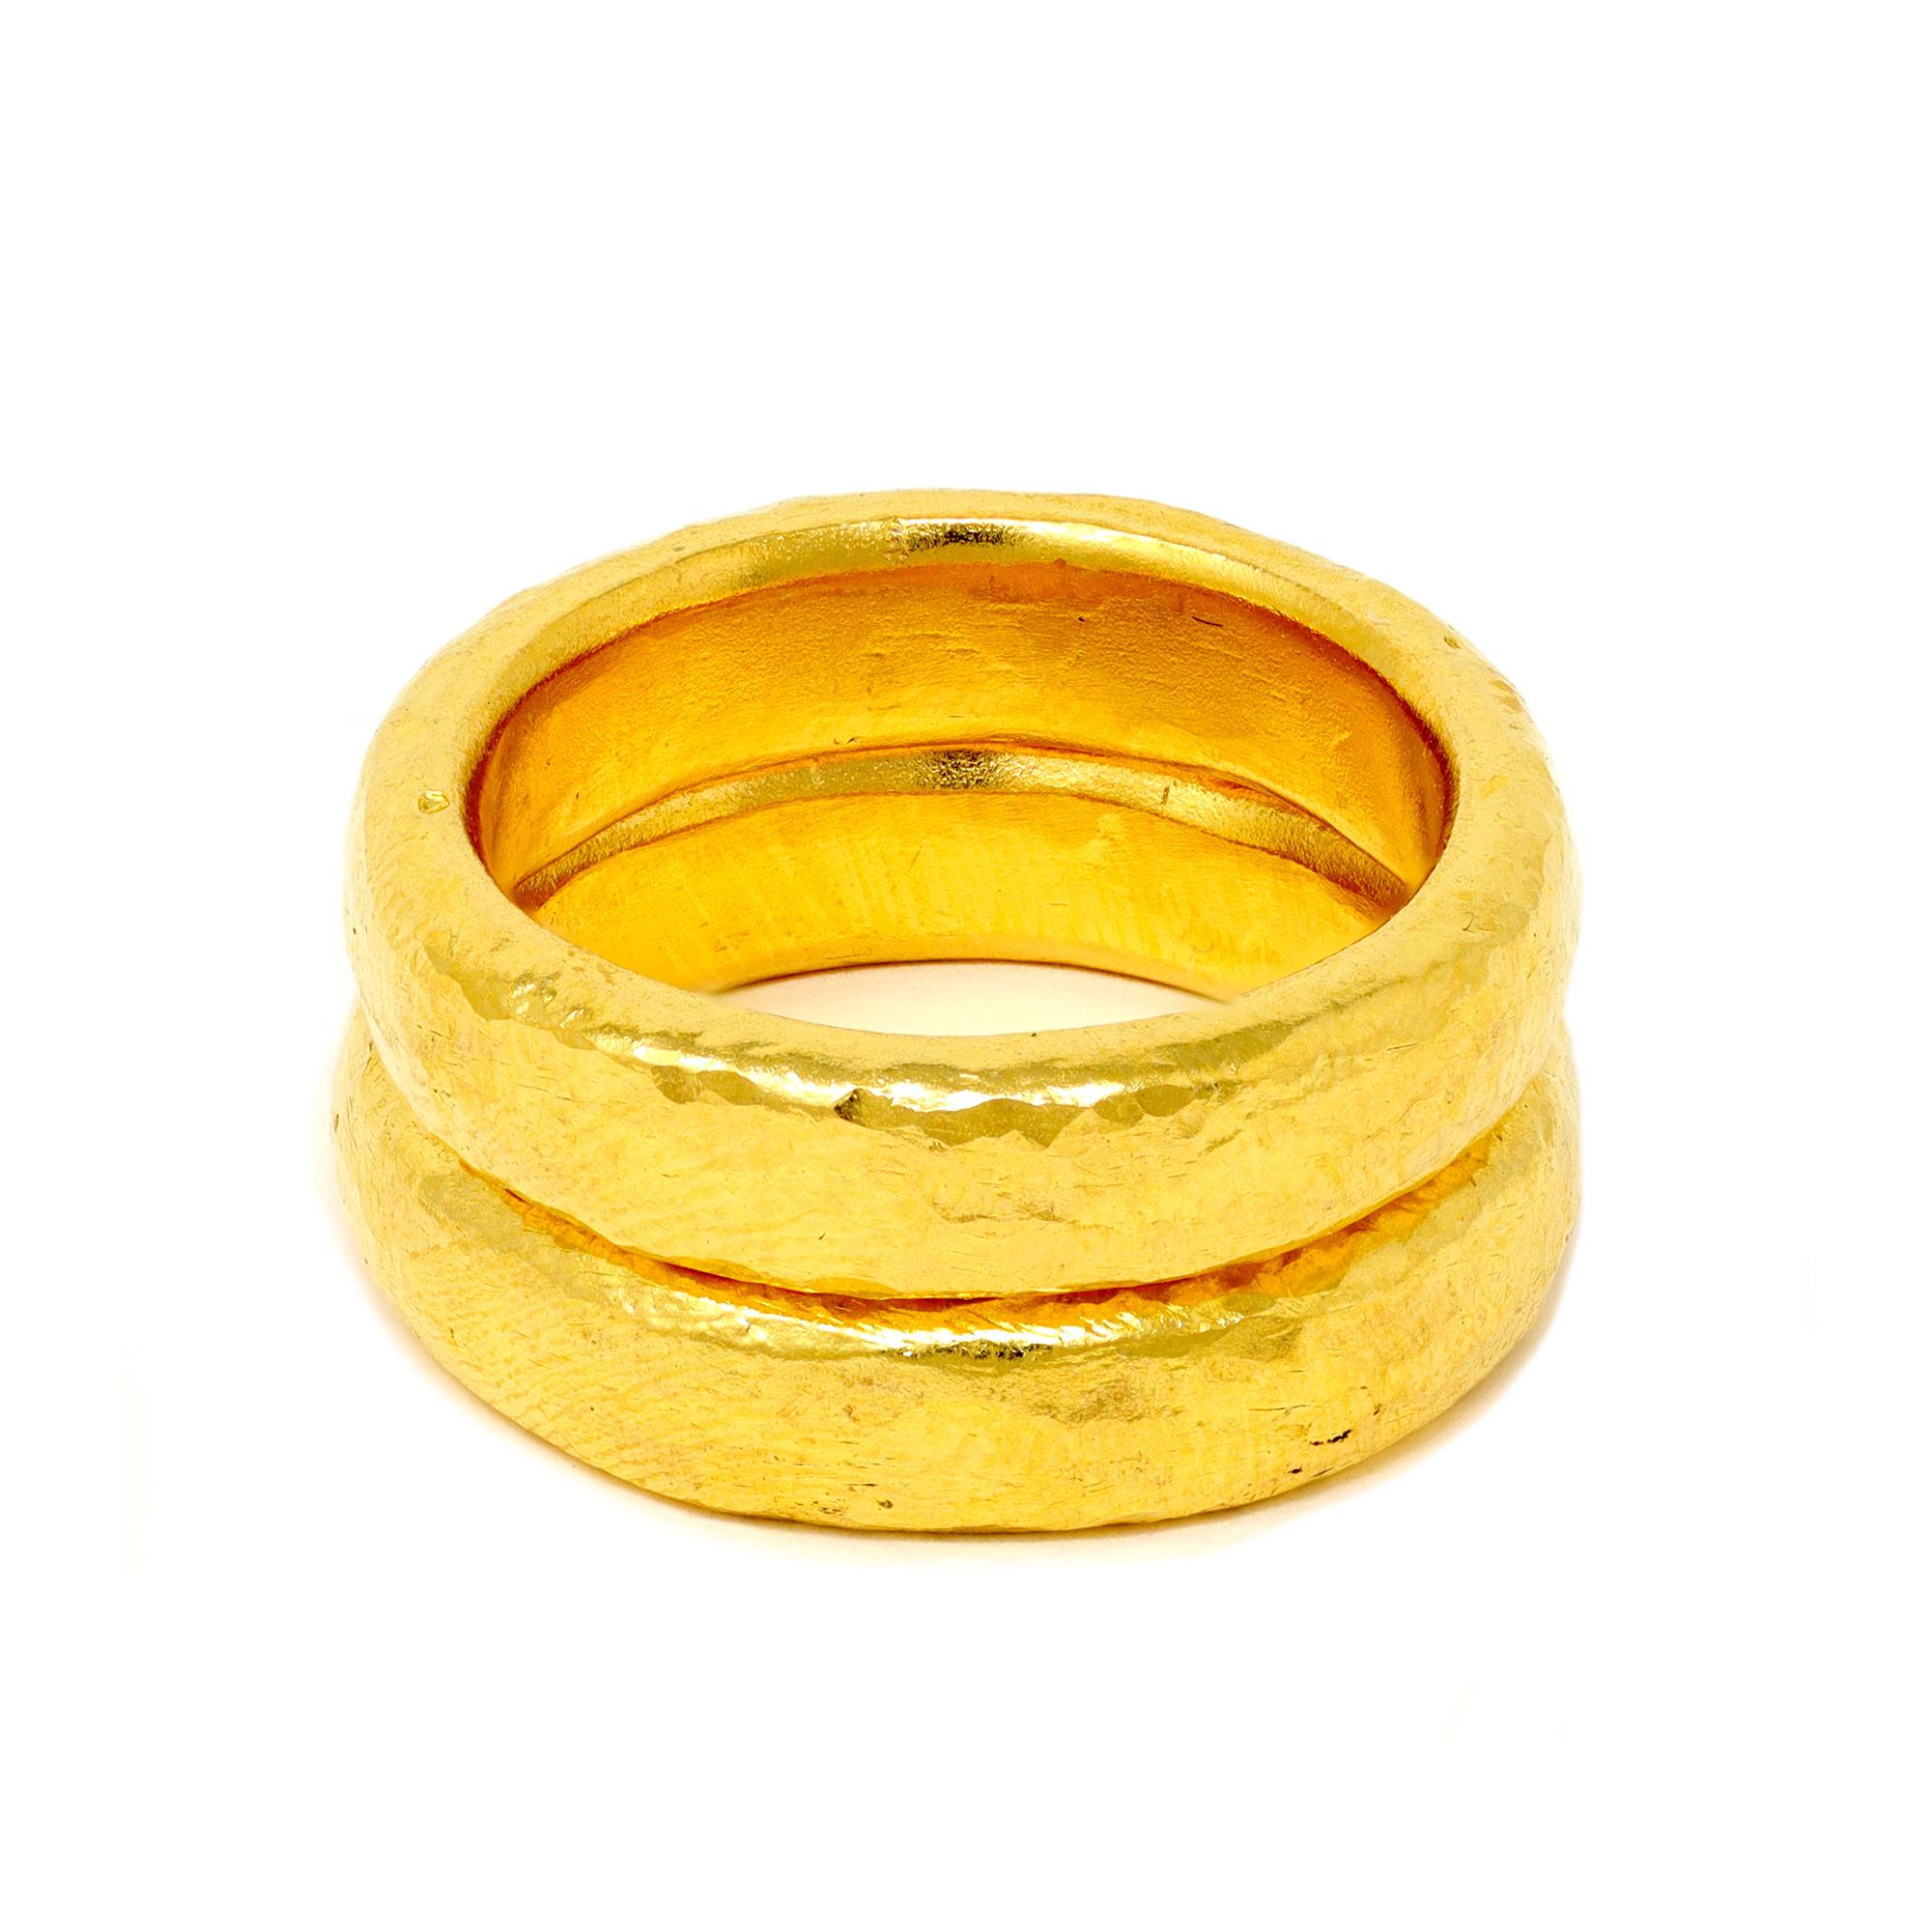 A pair of handmade 24 karat gold band rings by Rosaria Varra. The pure gold of 24k make these bands substantially hefty in weight  of around 14 grams depending  on finger size. These rings can be custom made to order. This set of bands are 8 ¾. 